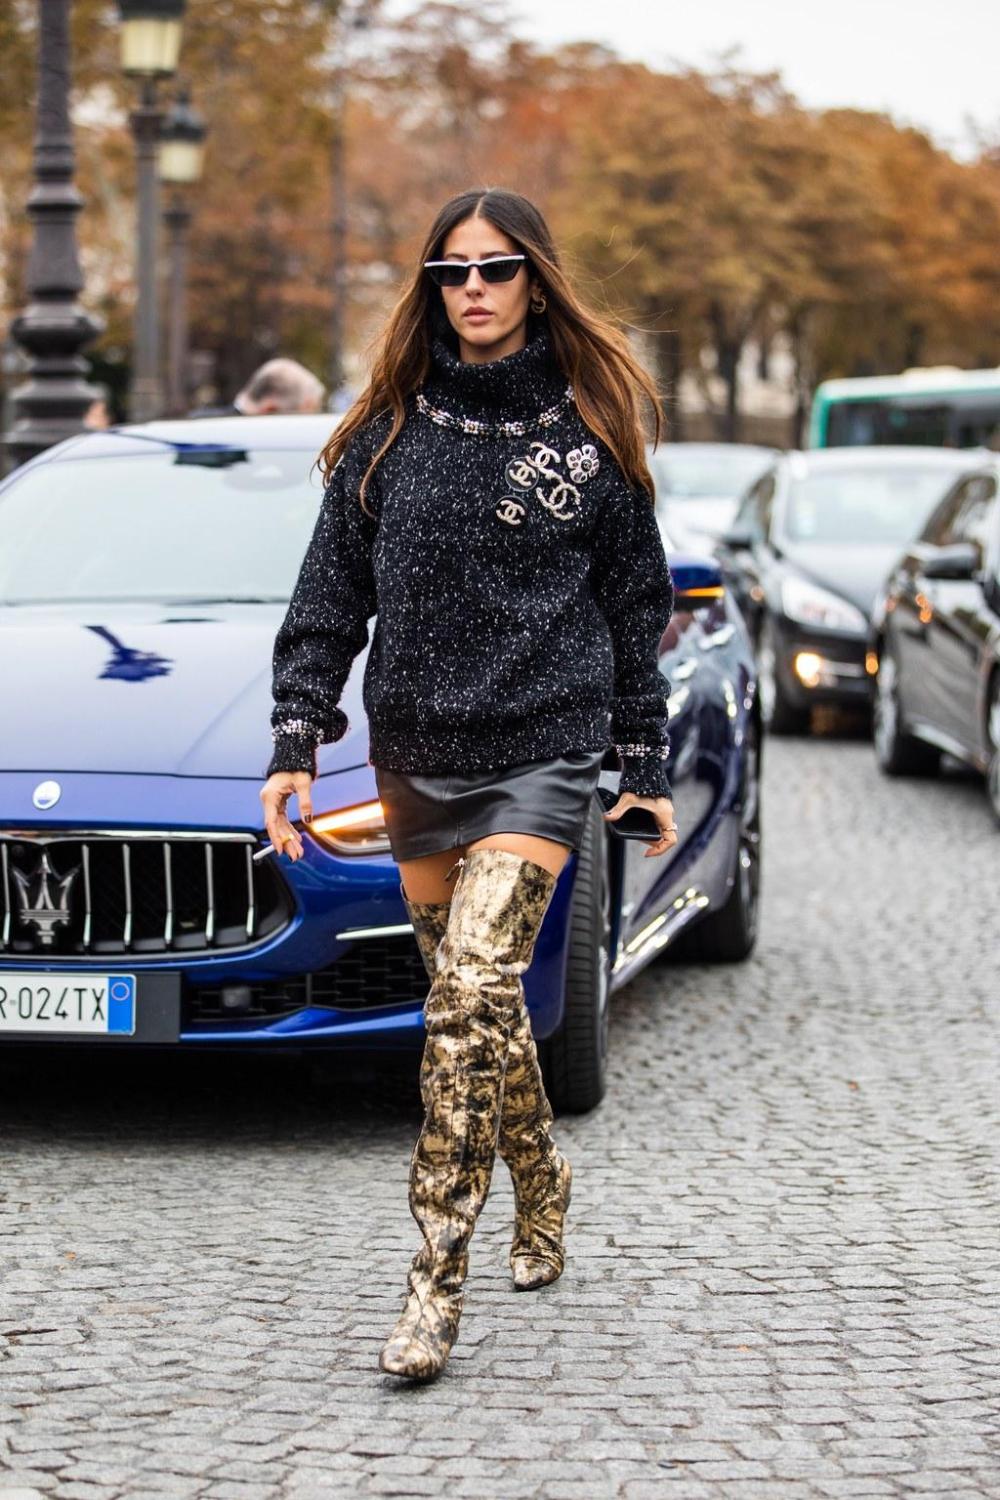 Vogue France on X: Gilda Ambrosio owning the streets of Paris in Chanel.  We want a pair of those gold knee-high boots. --->   © Sandra Semburg  / X